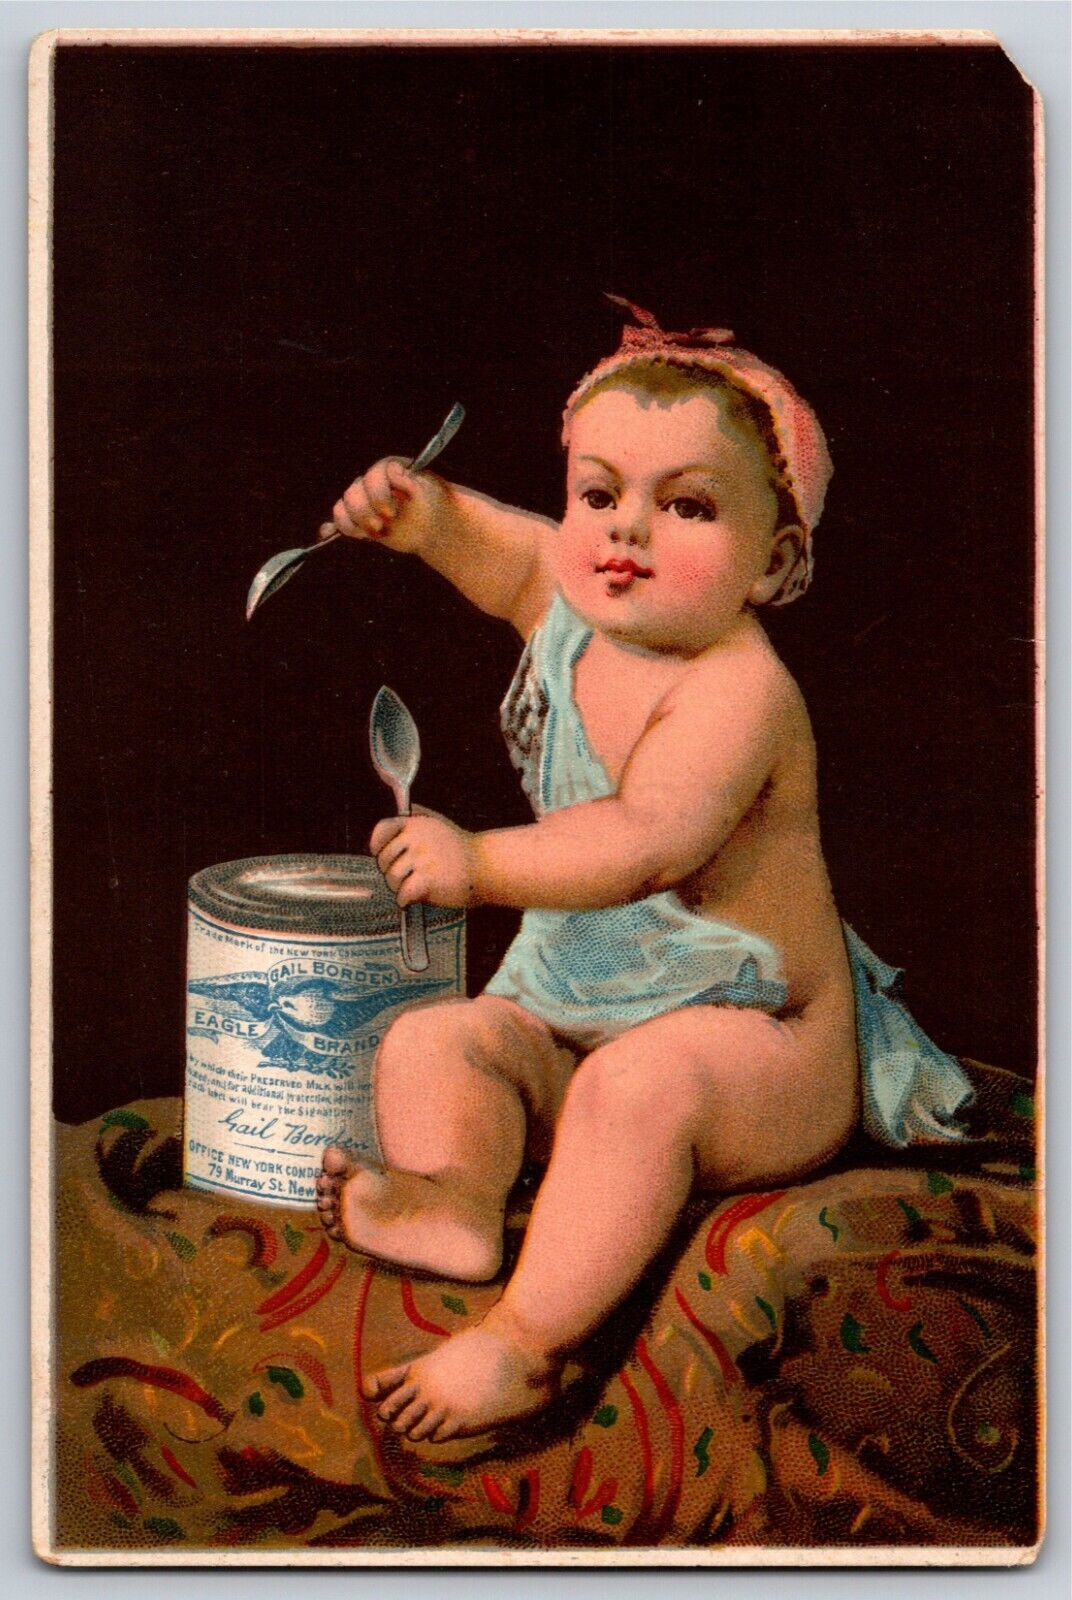 Gail Borden's Eagle Condensed Milk Victorian Trade Card Kid Eating From Can